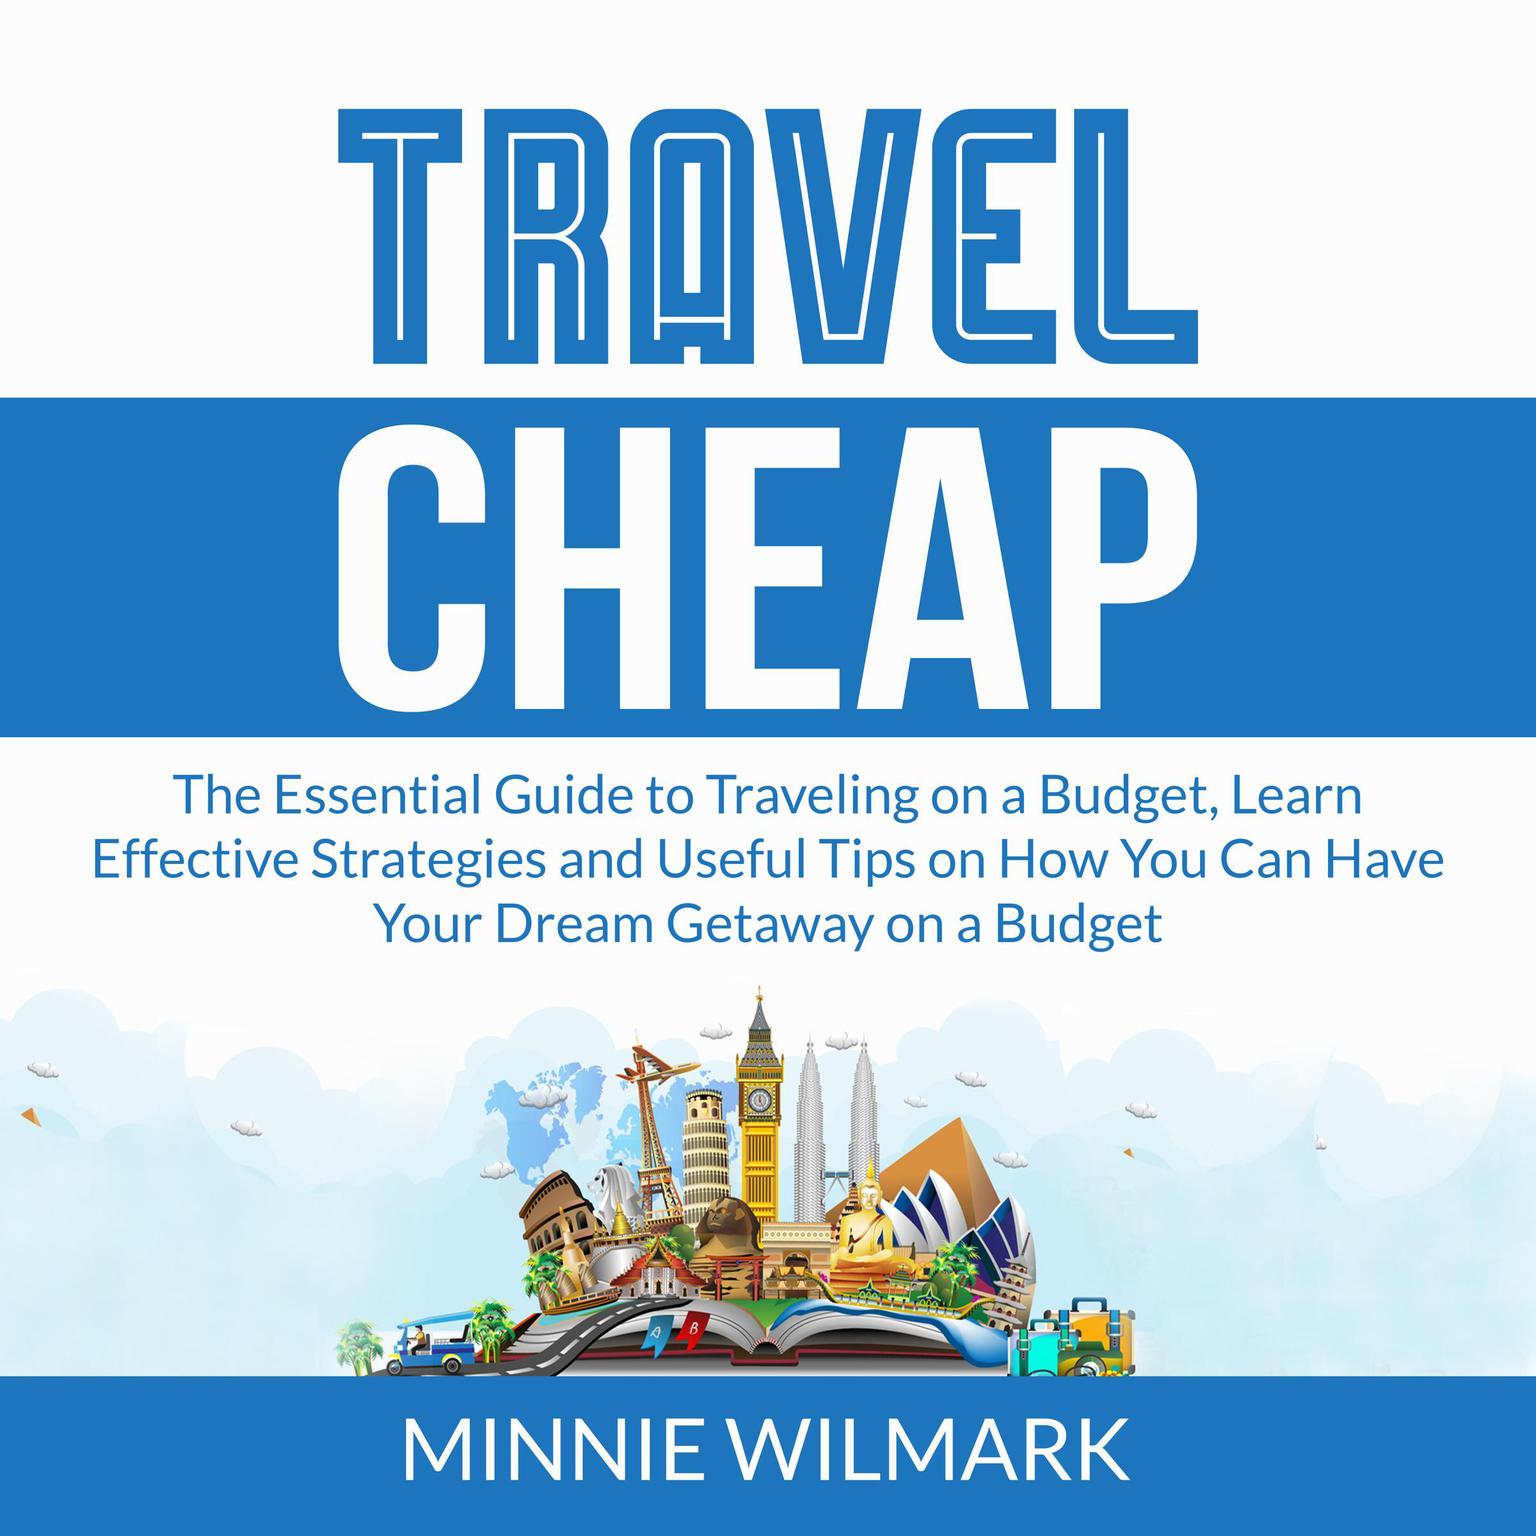 Travel Cheap: The Essential Guide to Traveling on a Budget, Learn Effective Strategies and Useful Tips on How You Can Have Your Dream Getaway on a Budget Audiobook, by Minnie Wilmark